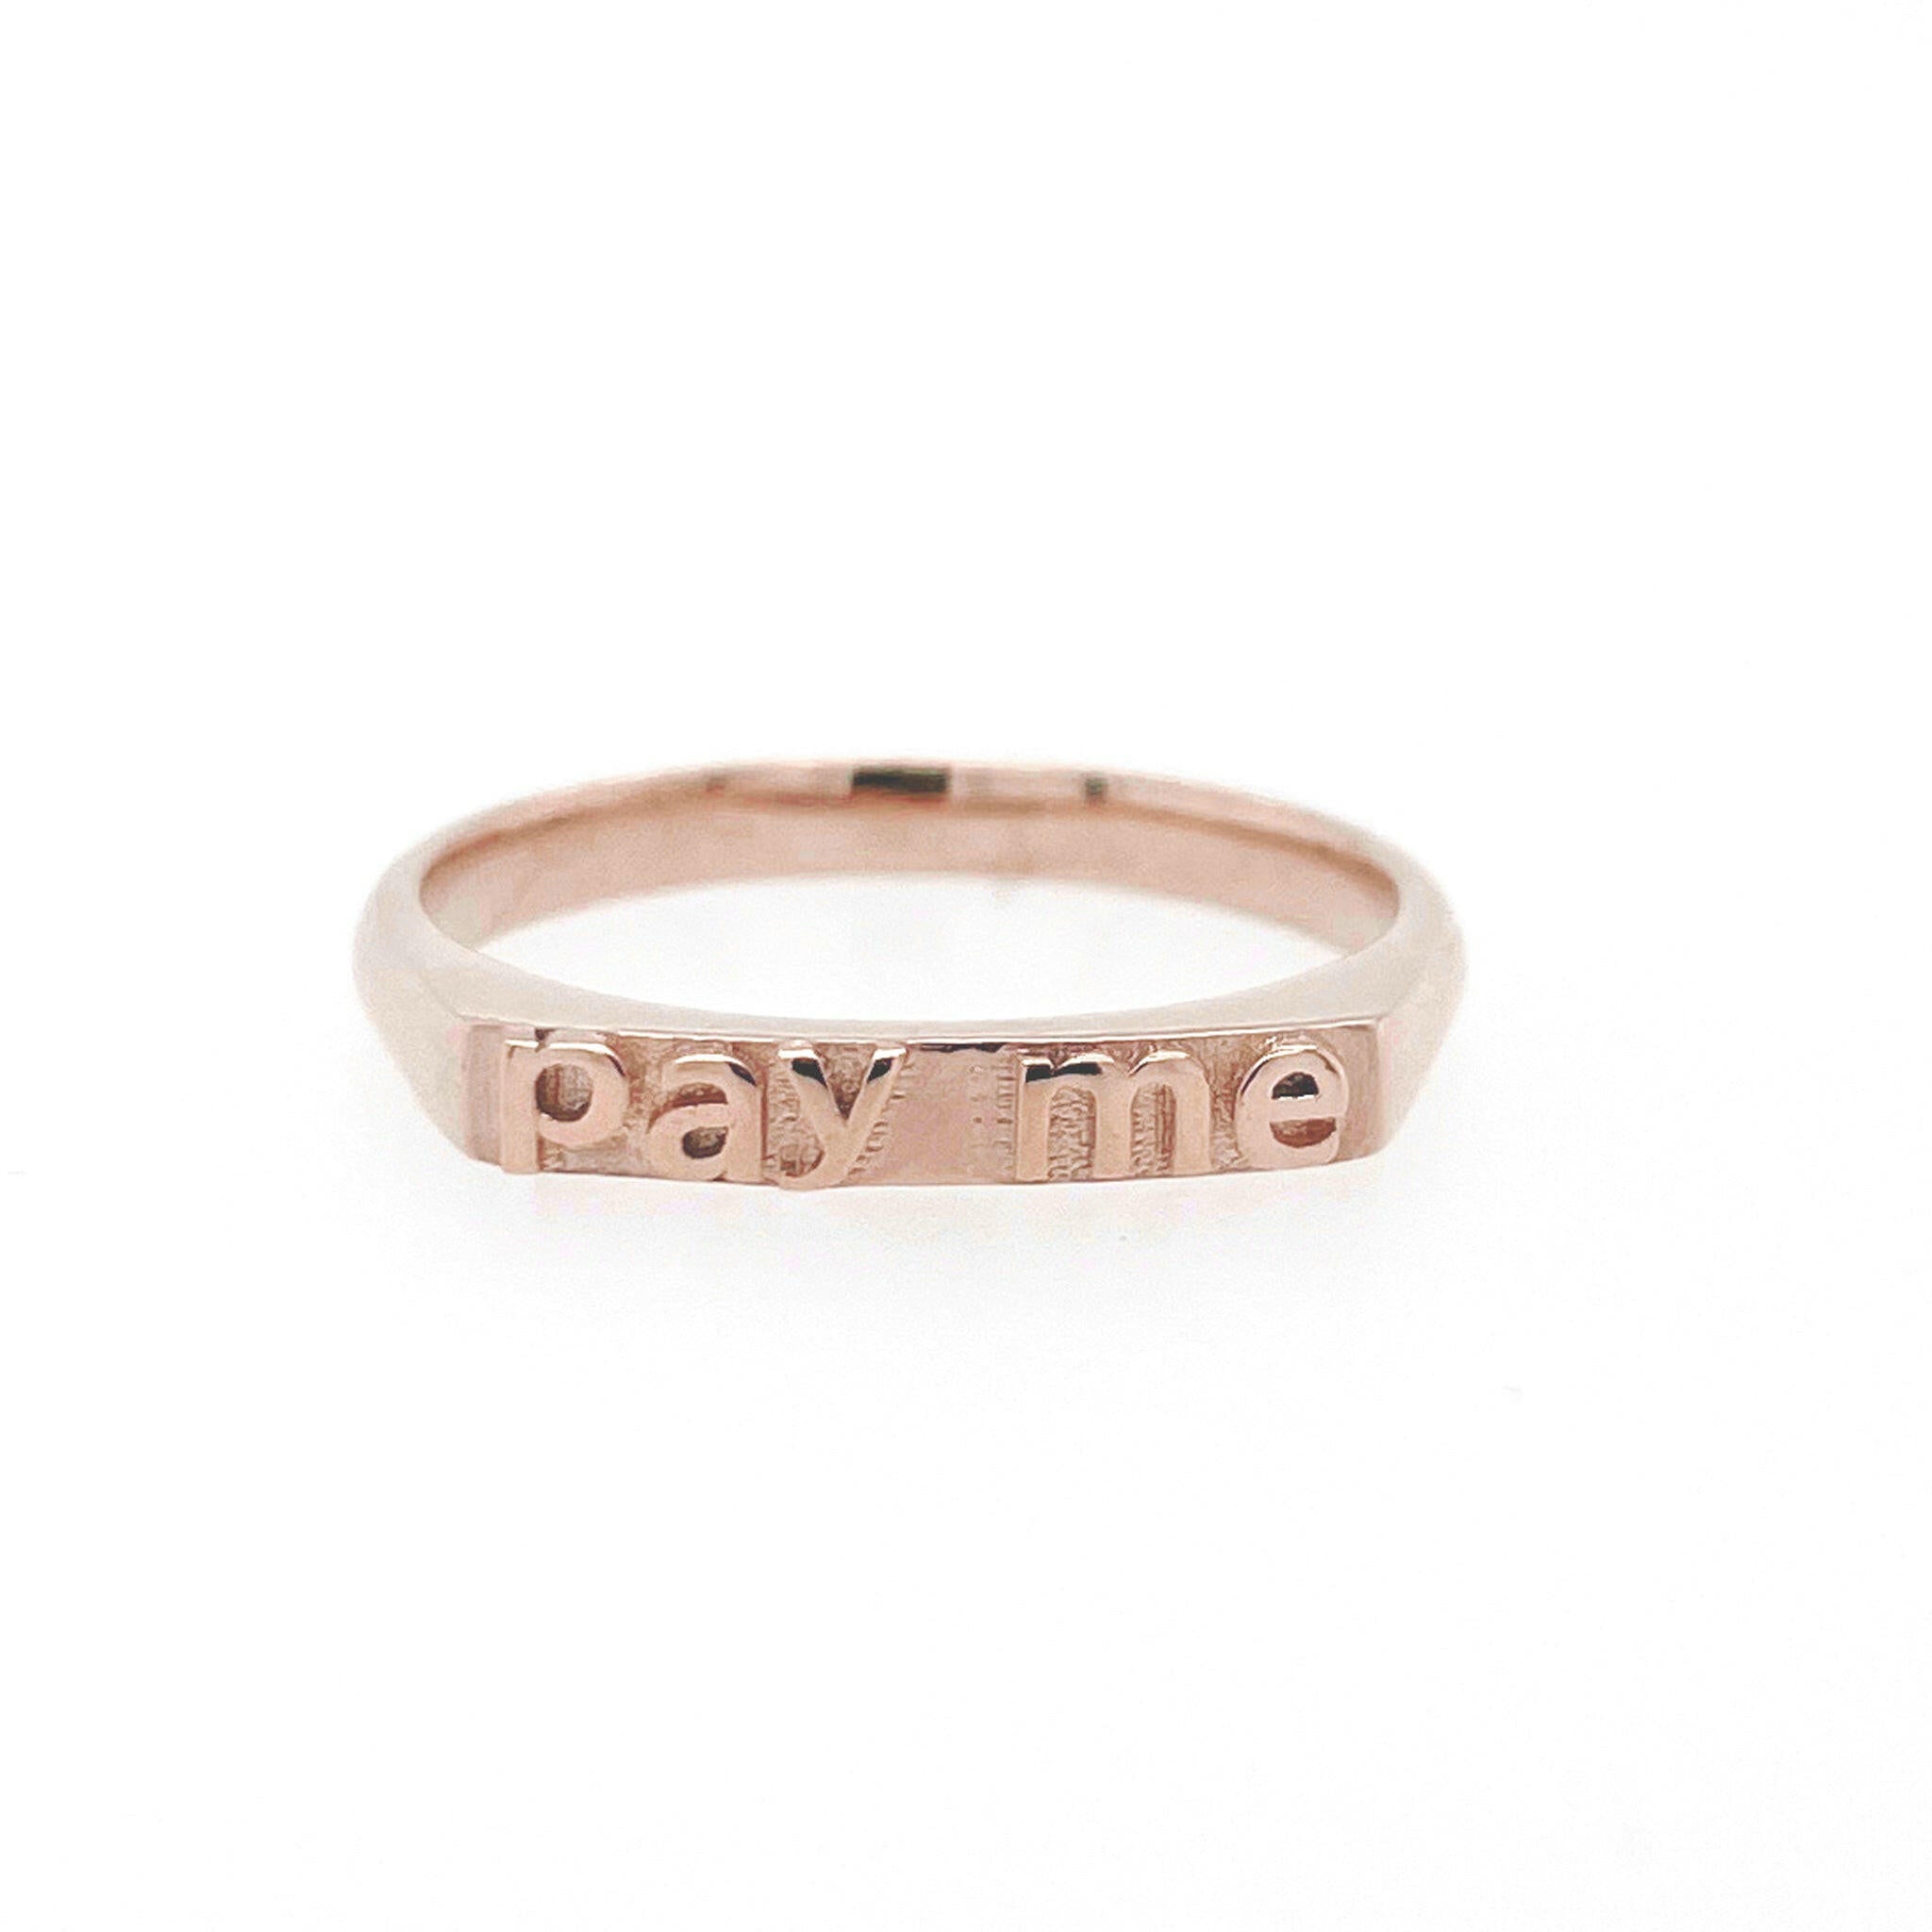 front view of 14 karat rose gold ring with text that reads "pay me"